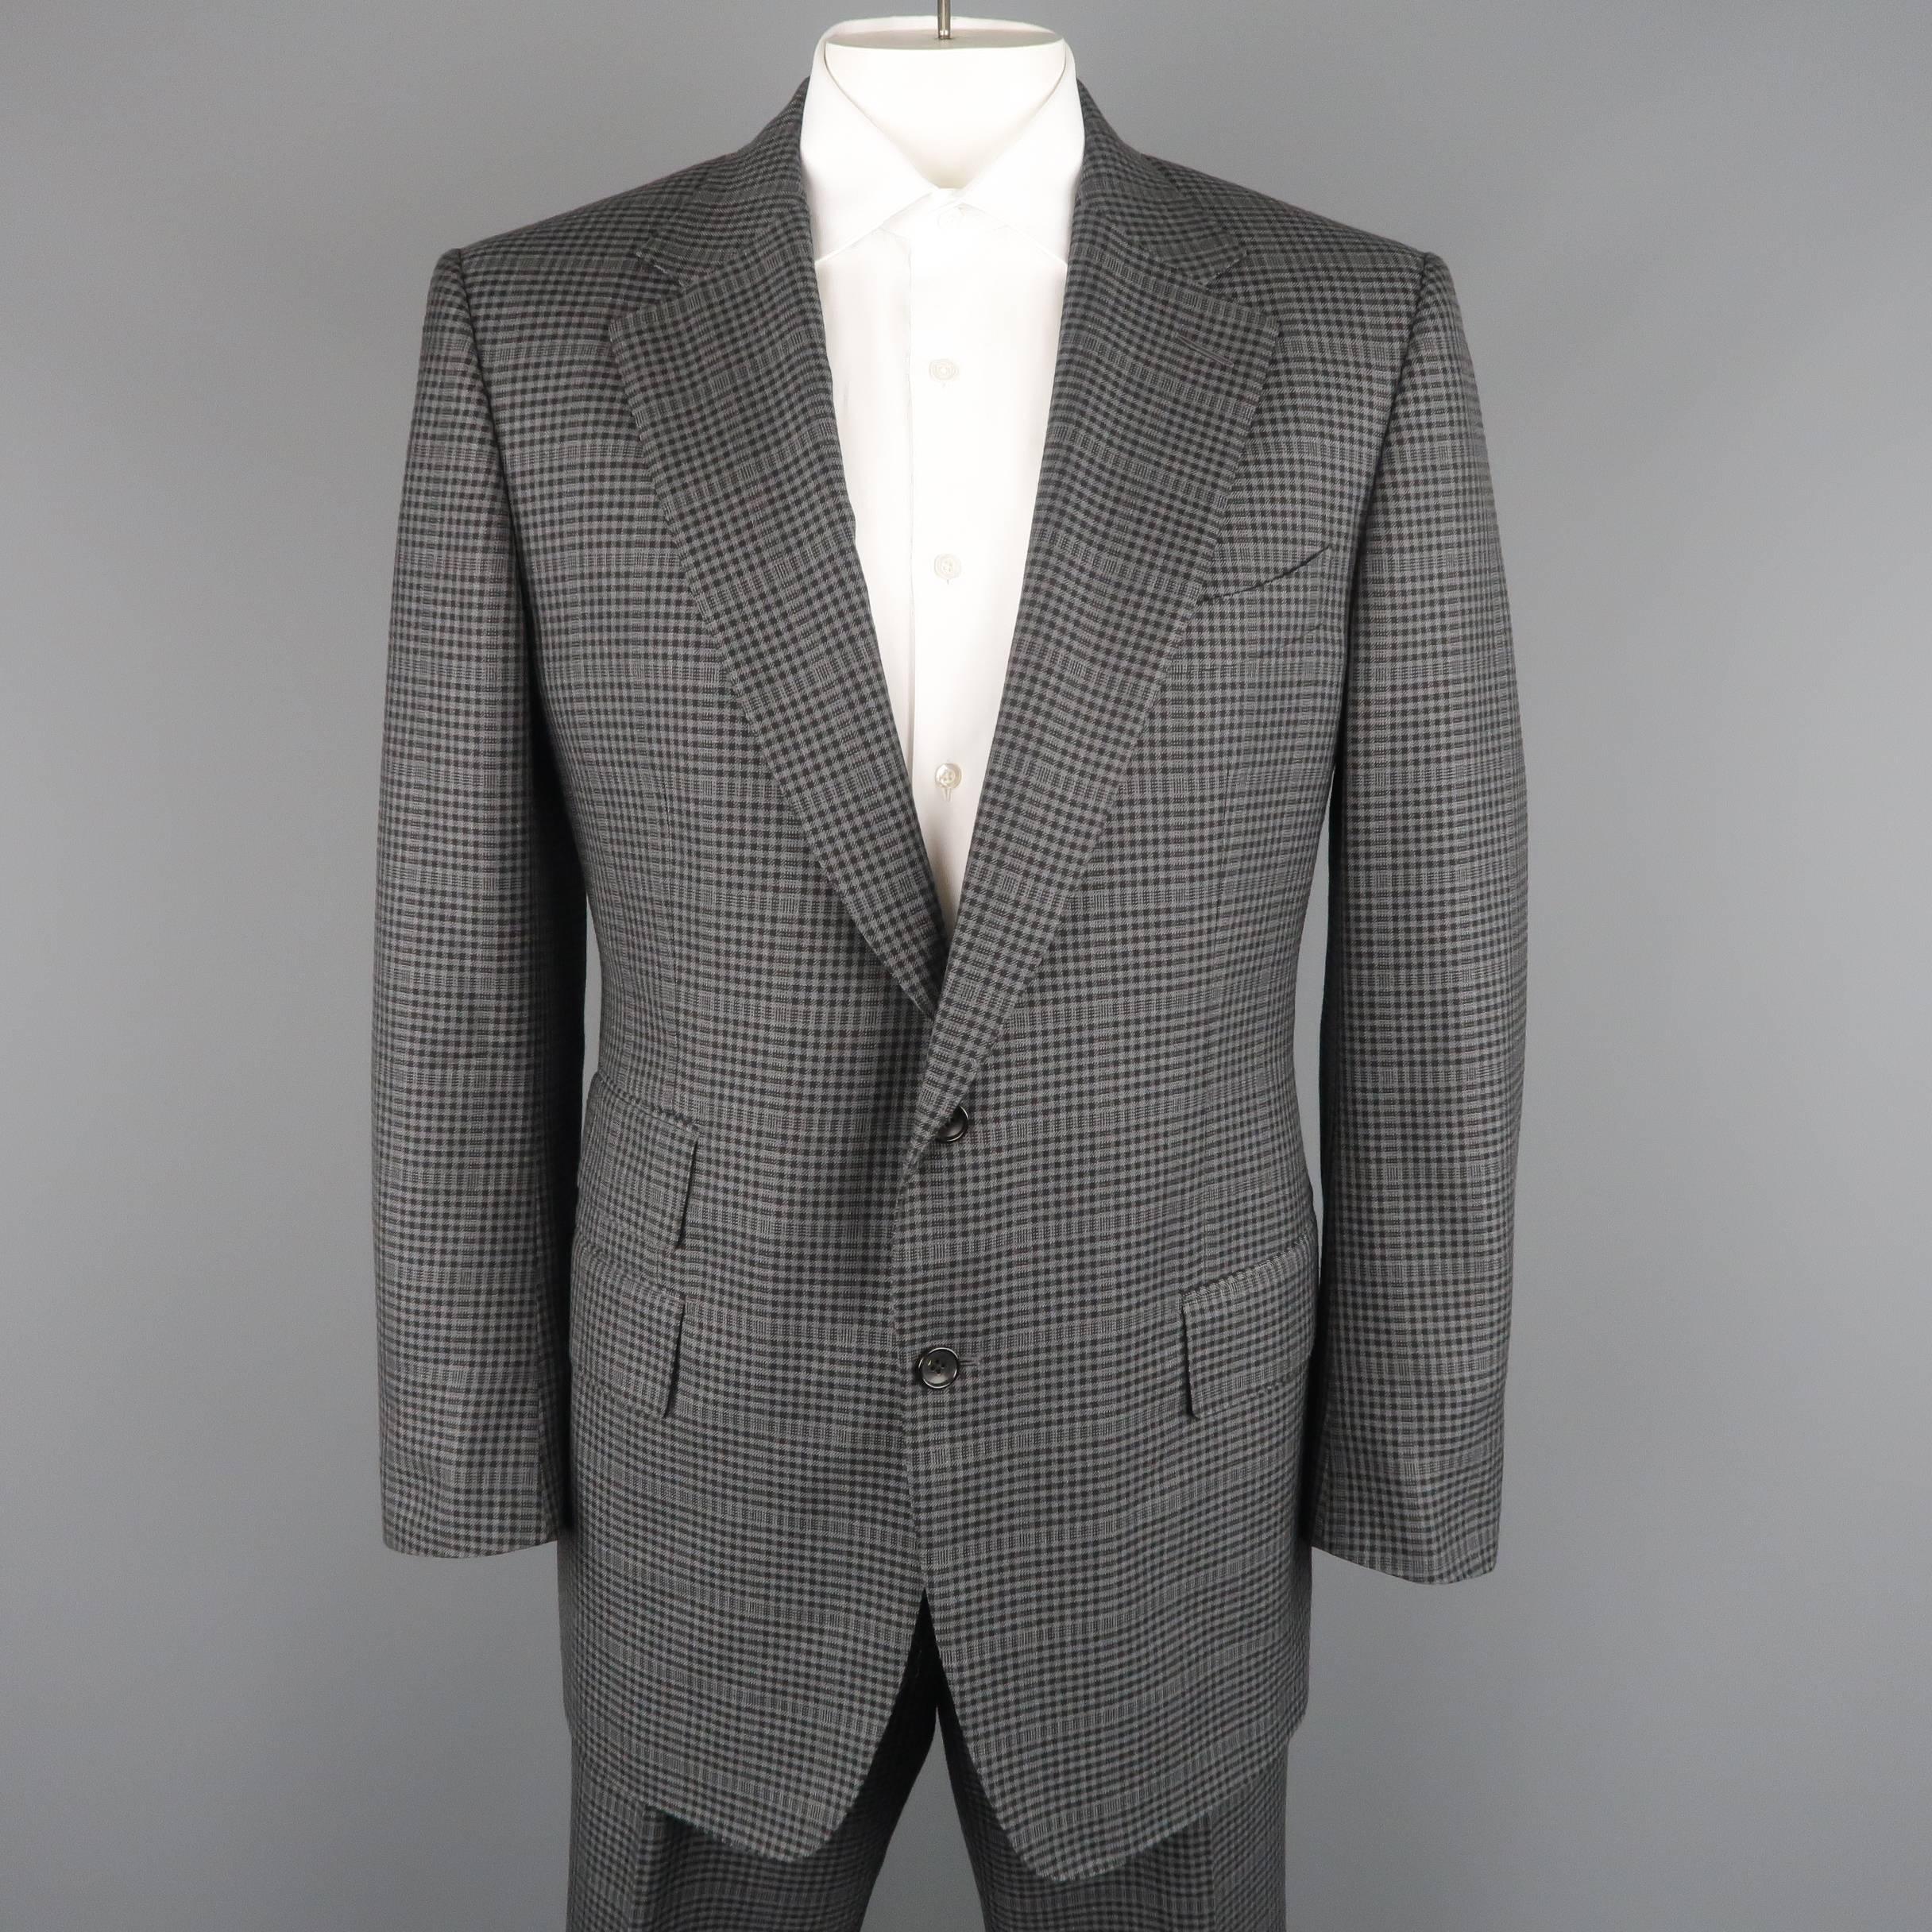 Two piece TOM FORD suit comes in dark gray and black plaid silk wool blend fabric and includes a single breasted, two button, notch lapel jacket with triple flap pockets, and functional button cuffs with matching cuffed, flat front trousers. Made in